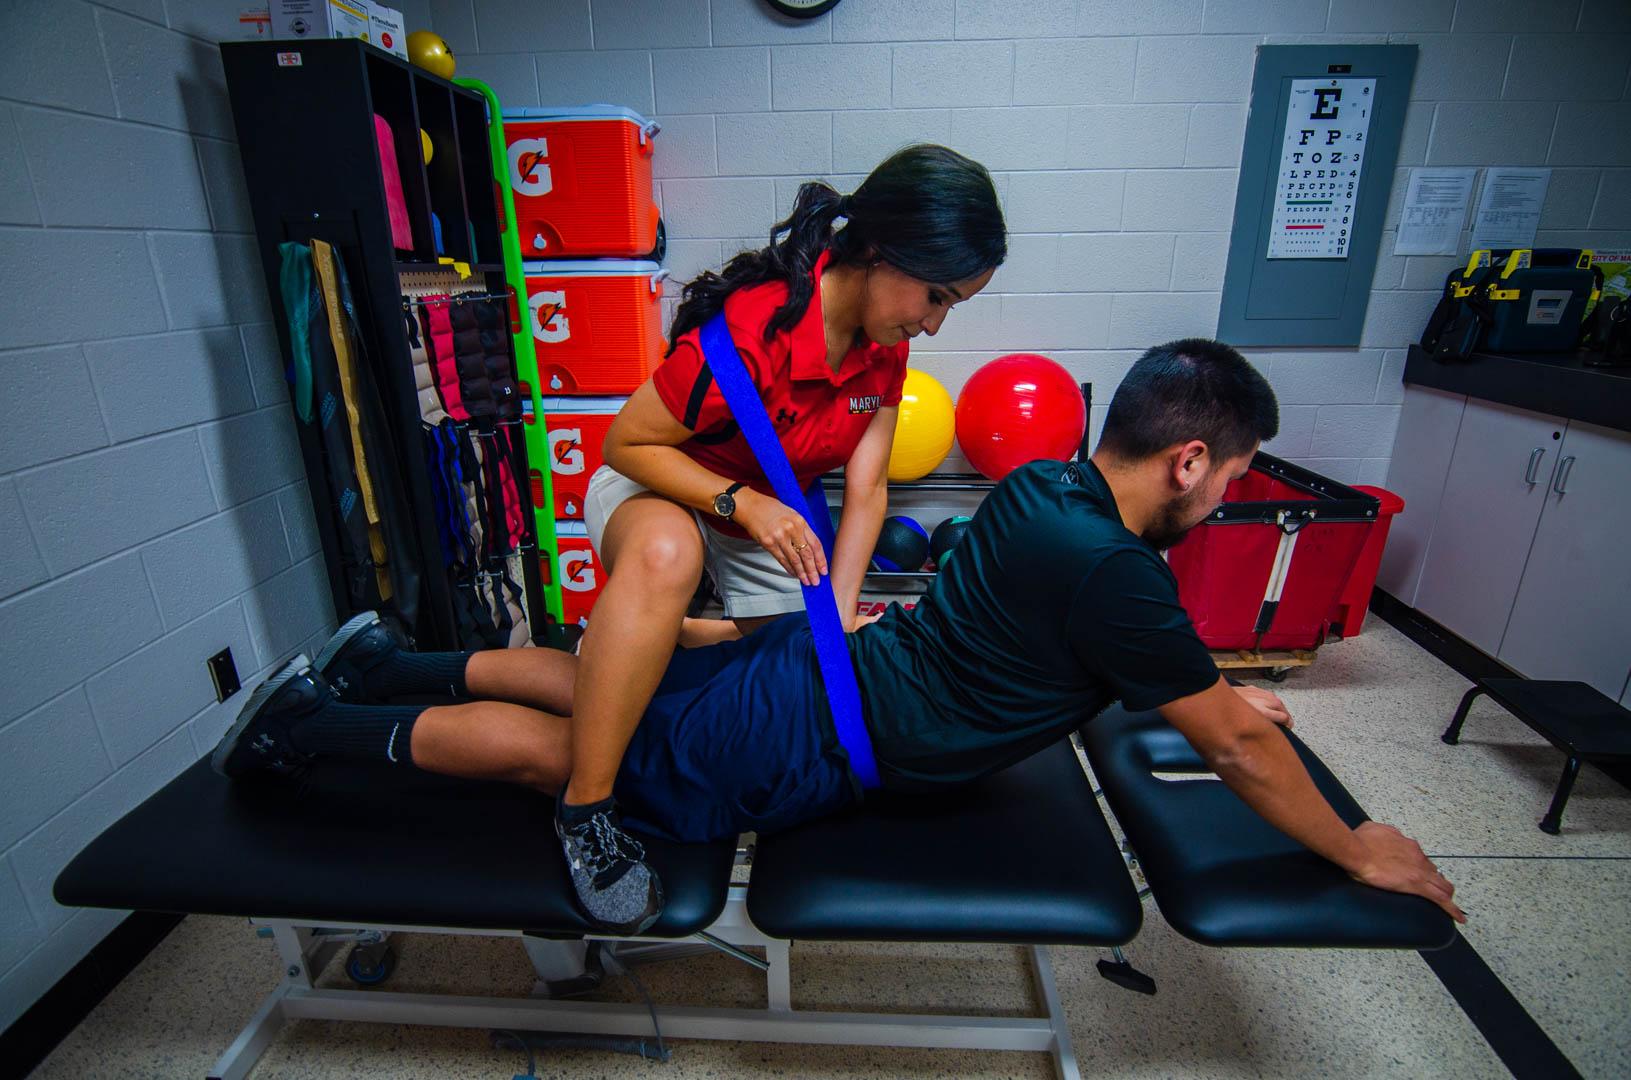 What Does an Athletic Trainer Actually Do? - The Center for